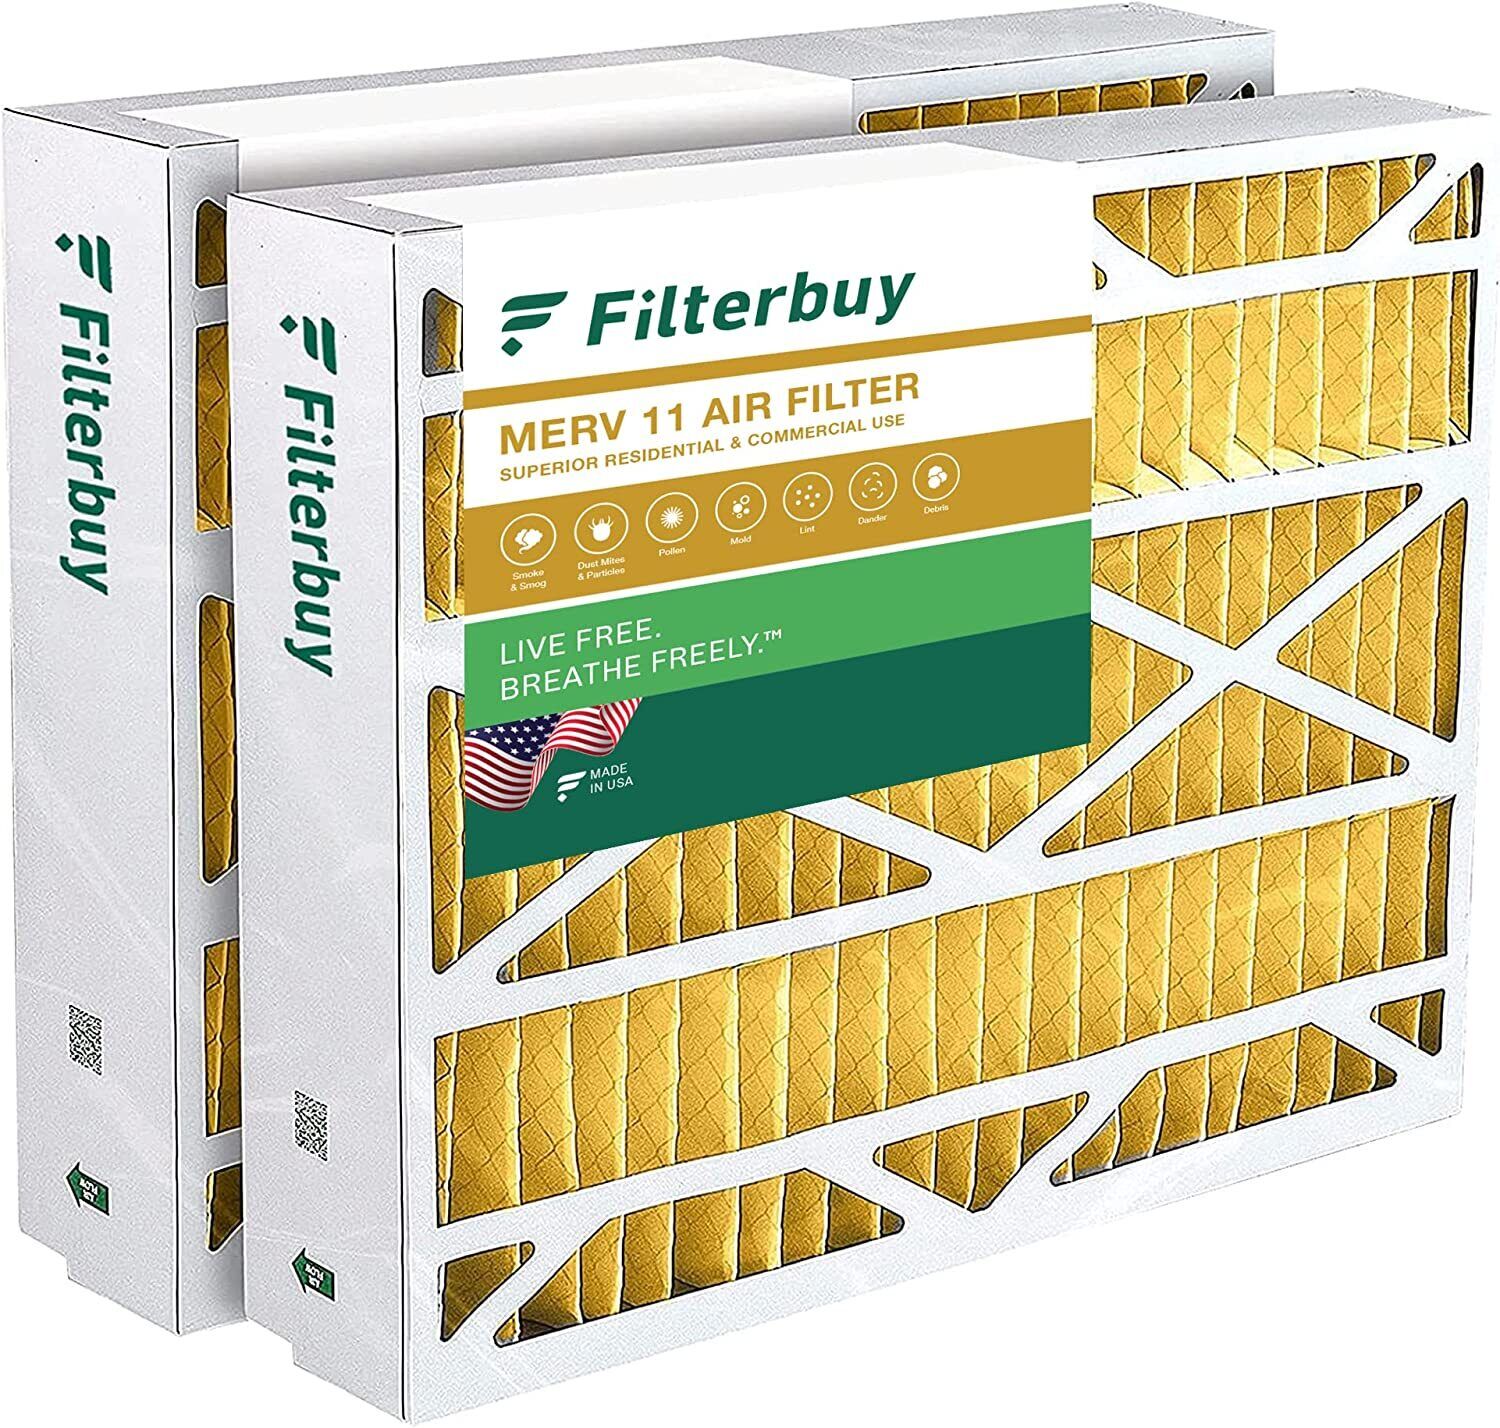 Filterbuy 24x25x5 Air Filter MERV 11, Pleated AC Furnace Replacement for Carrier